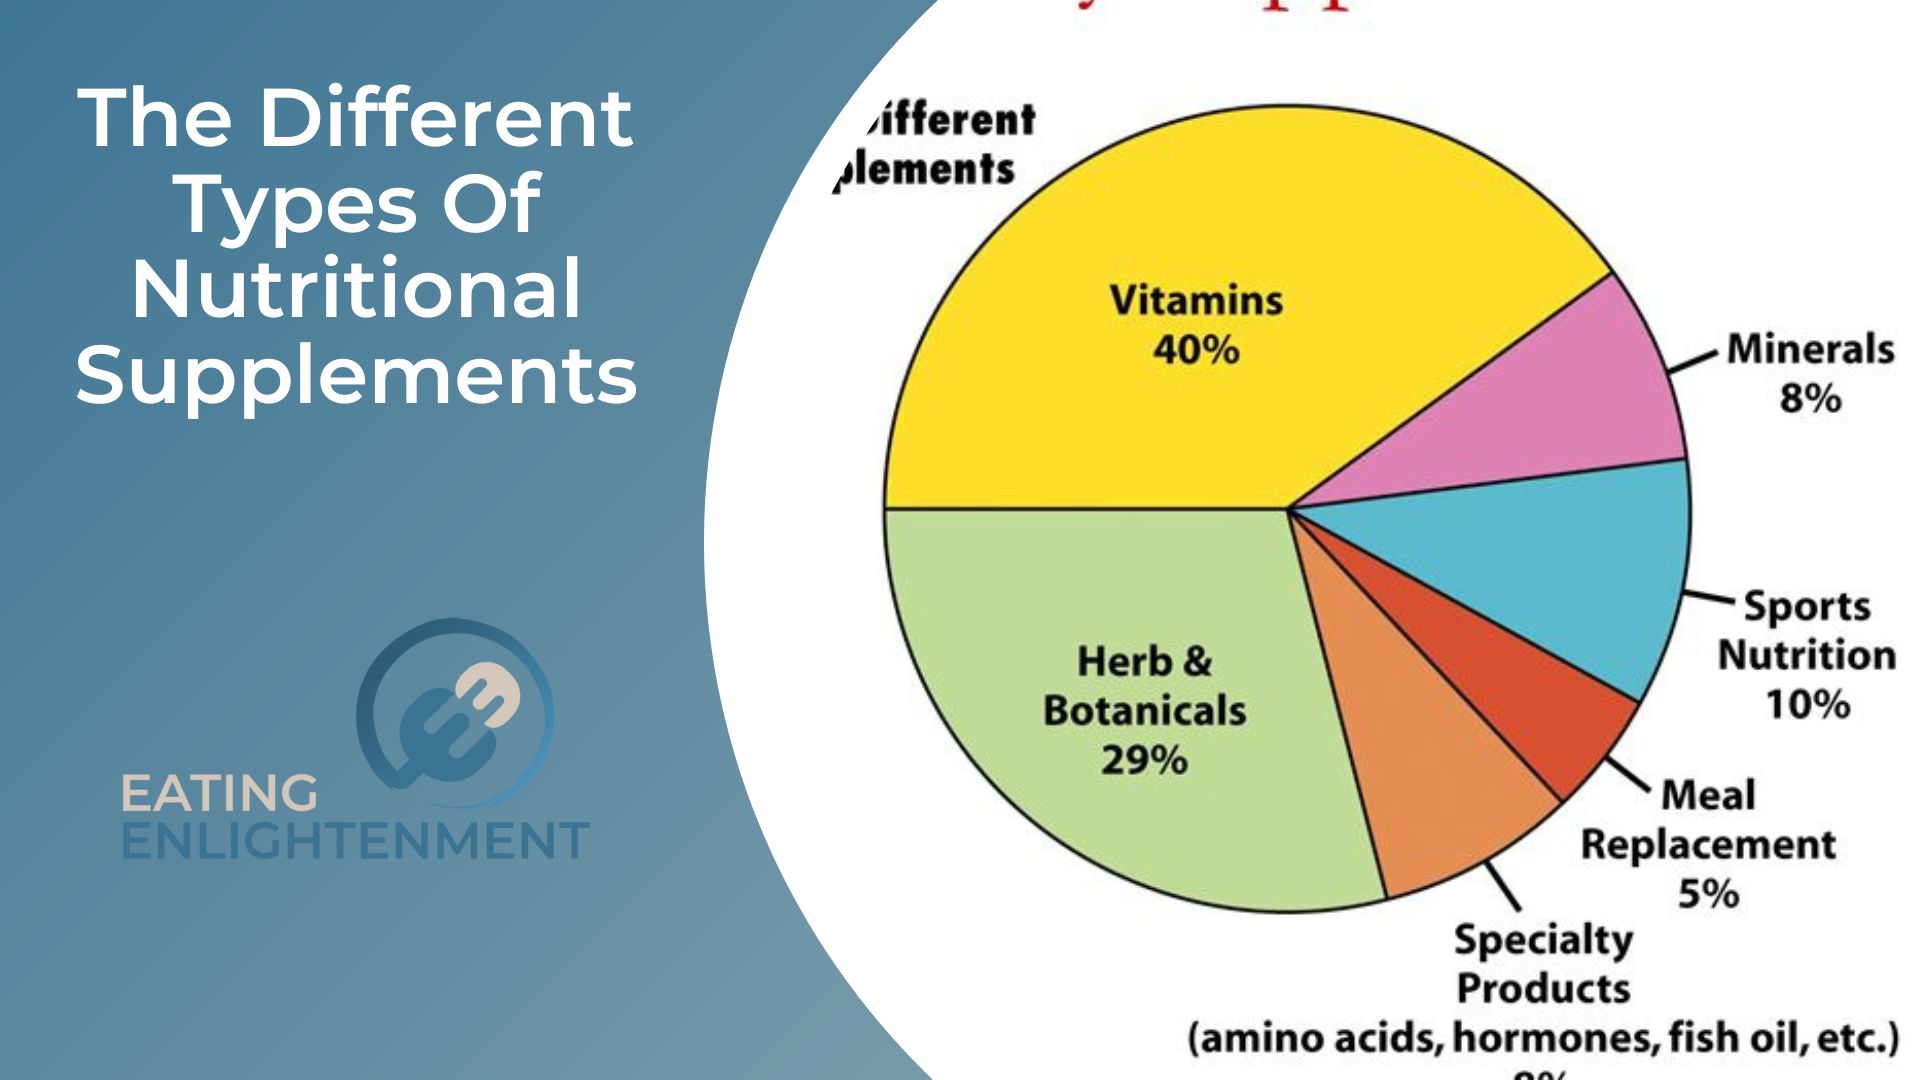 The Different Types Of Nutritional Supplements